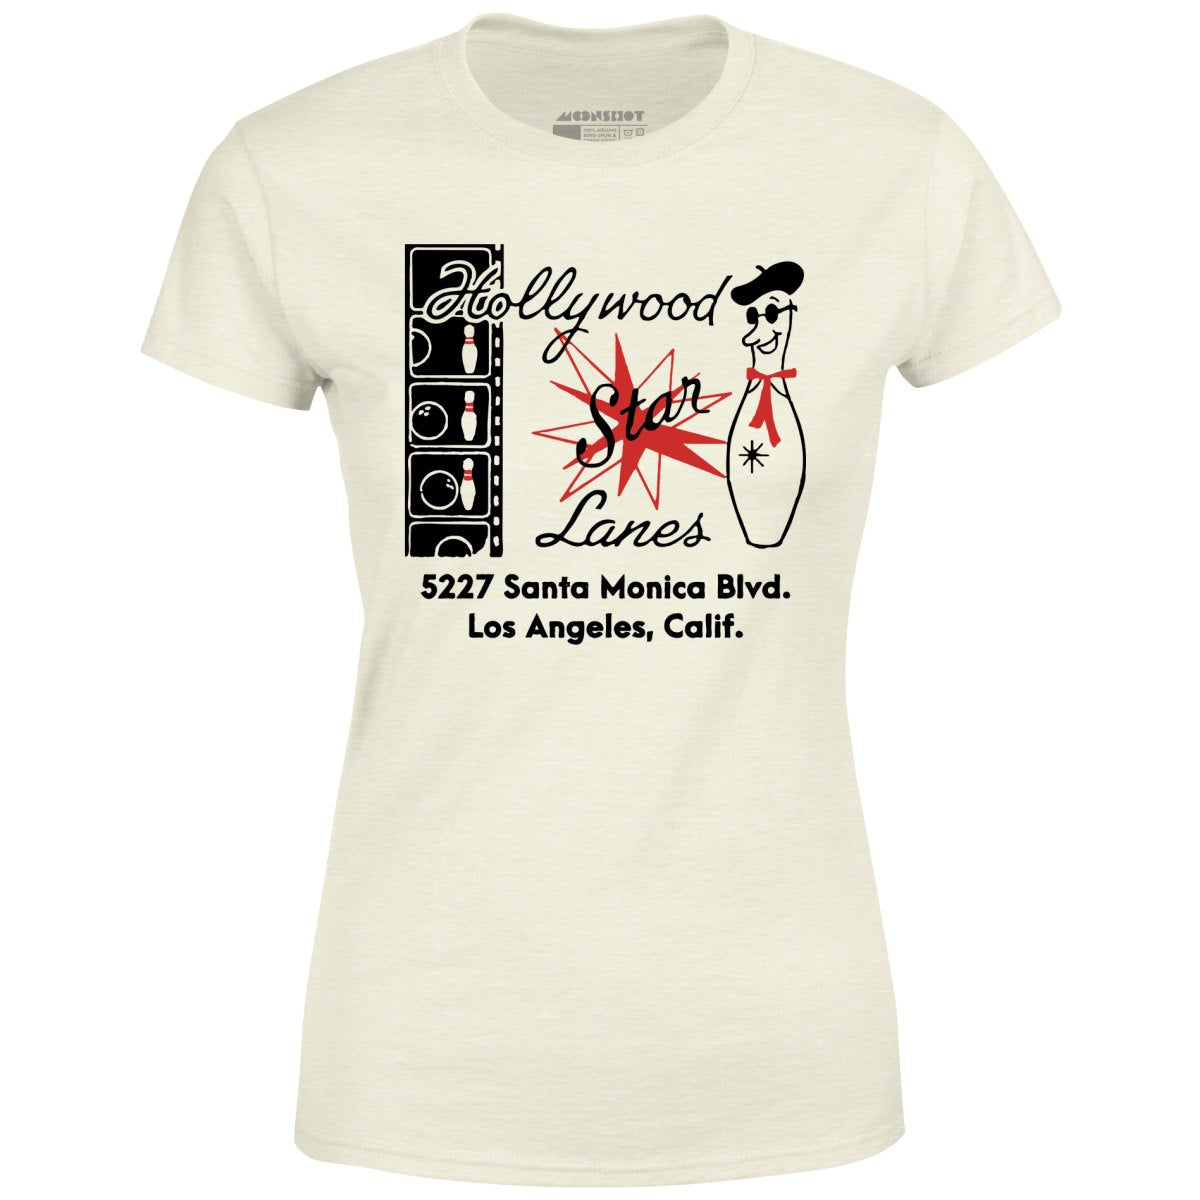 Hollywood Star Lanes - Los Angeles, CA - Vintage Bowling Alley - Women's T-Shirt